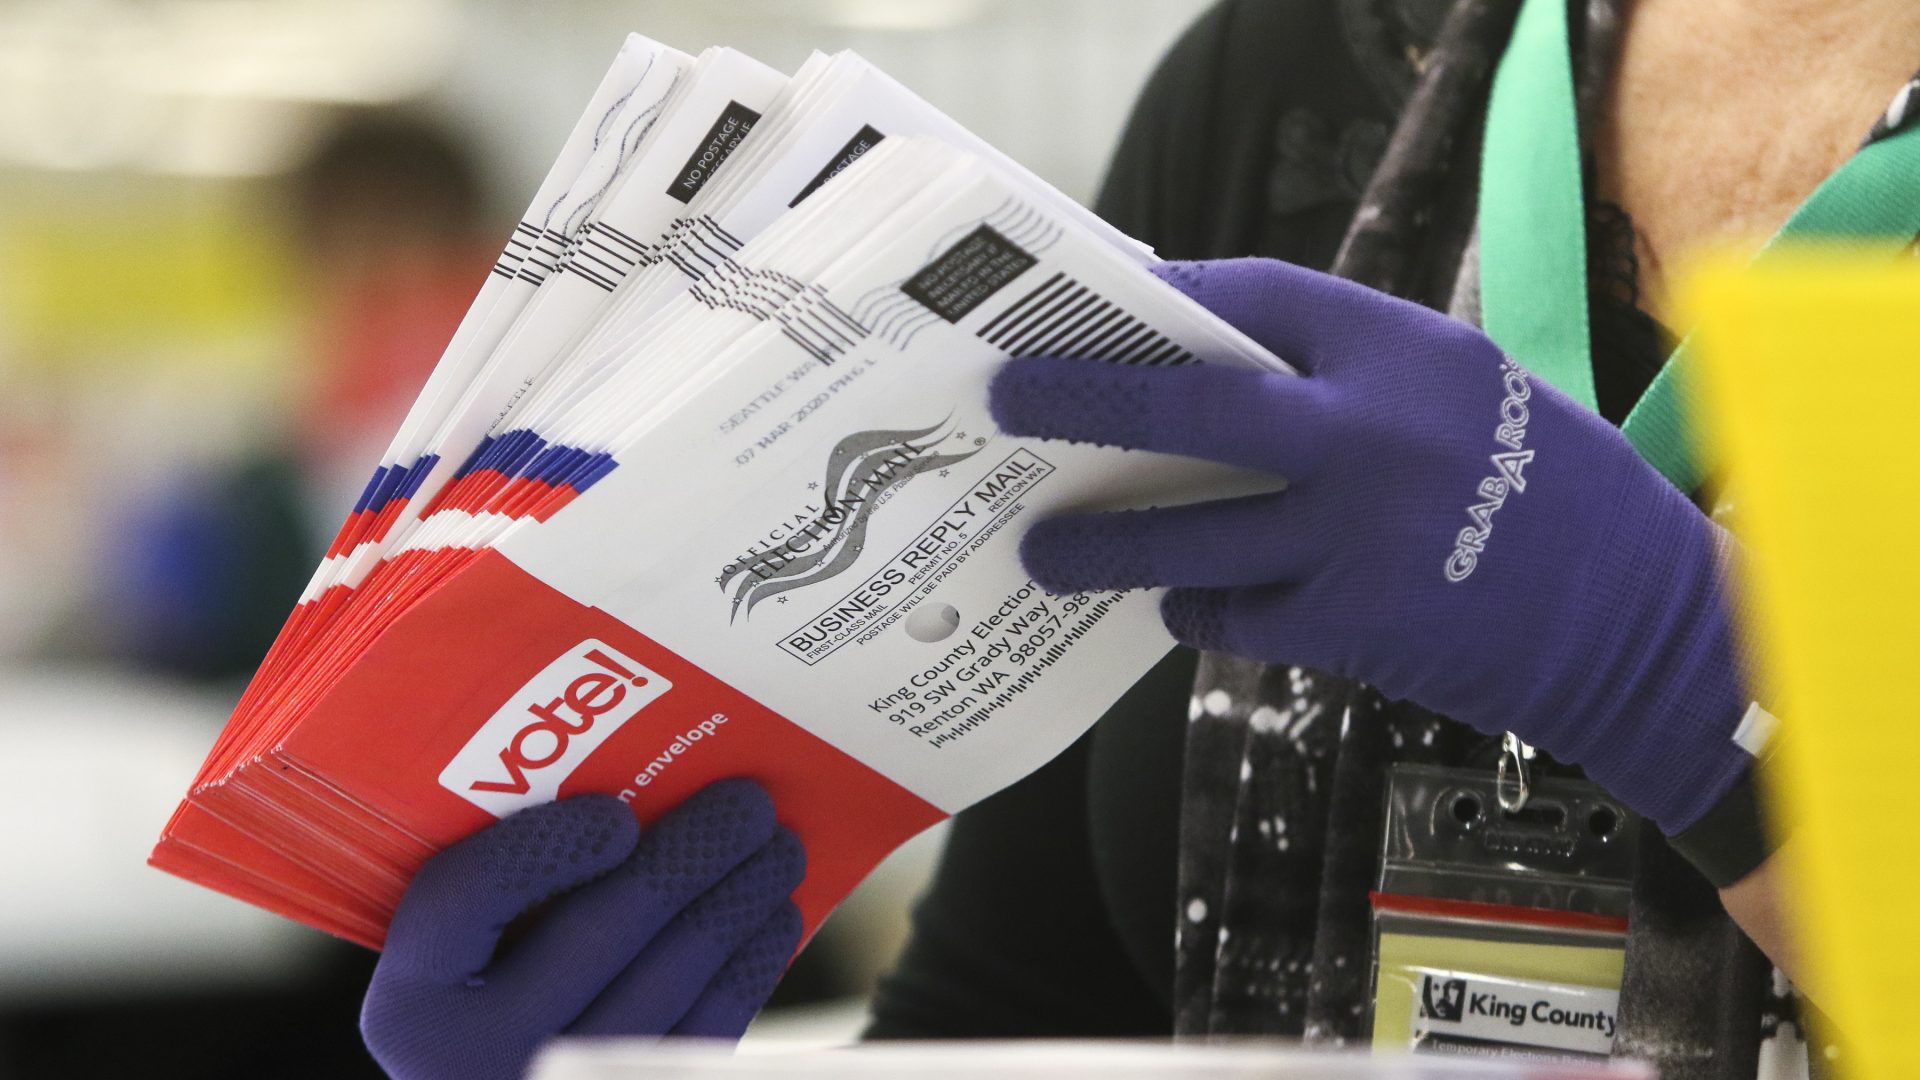 An election worker sorts vote-by-mail ballots for the presidential primary in Washington on March 10.